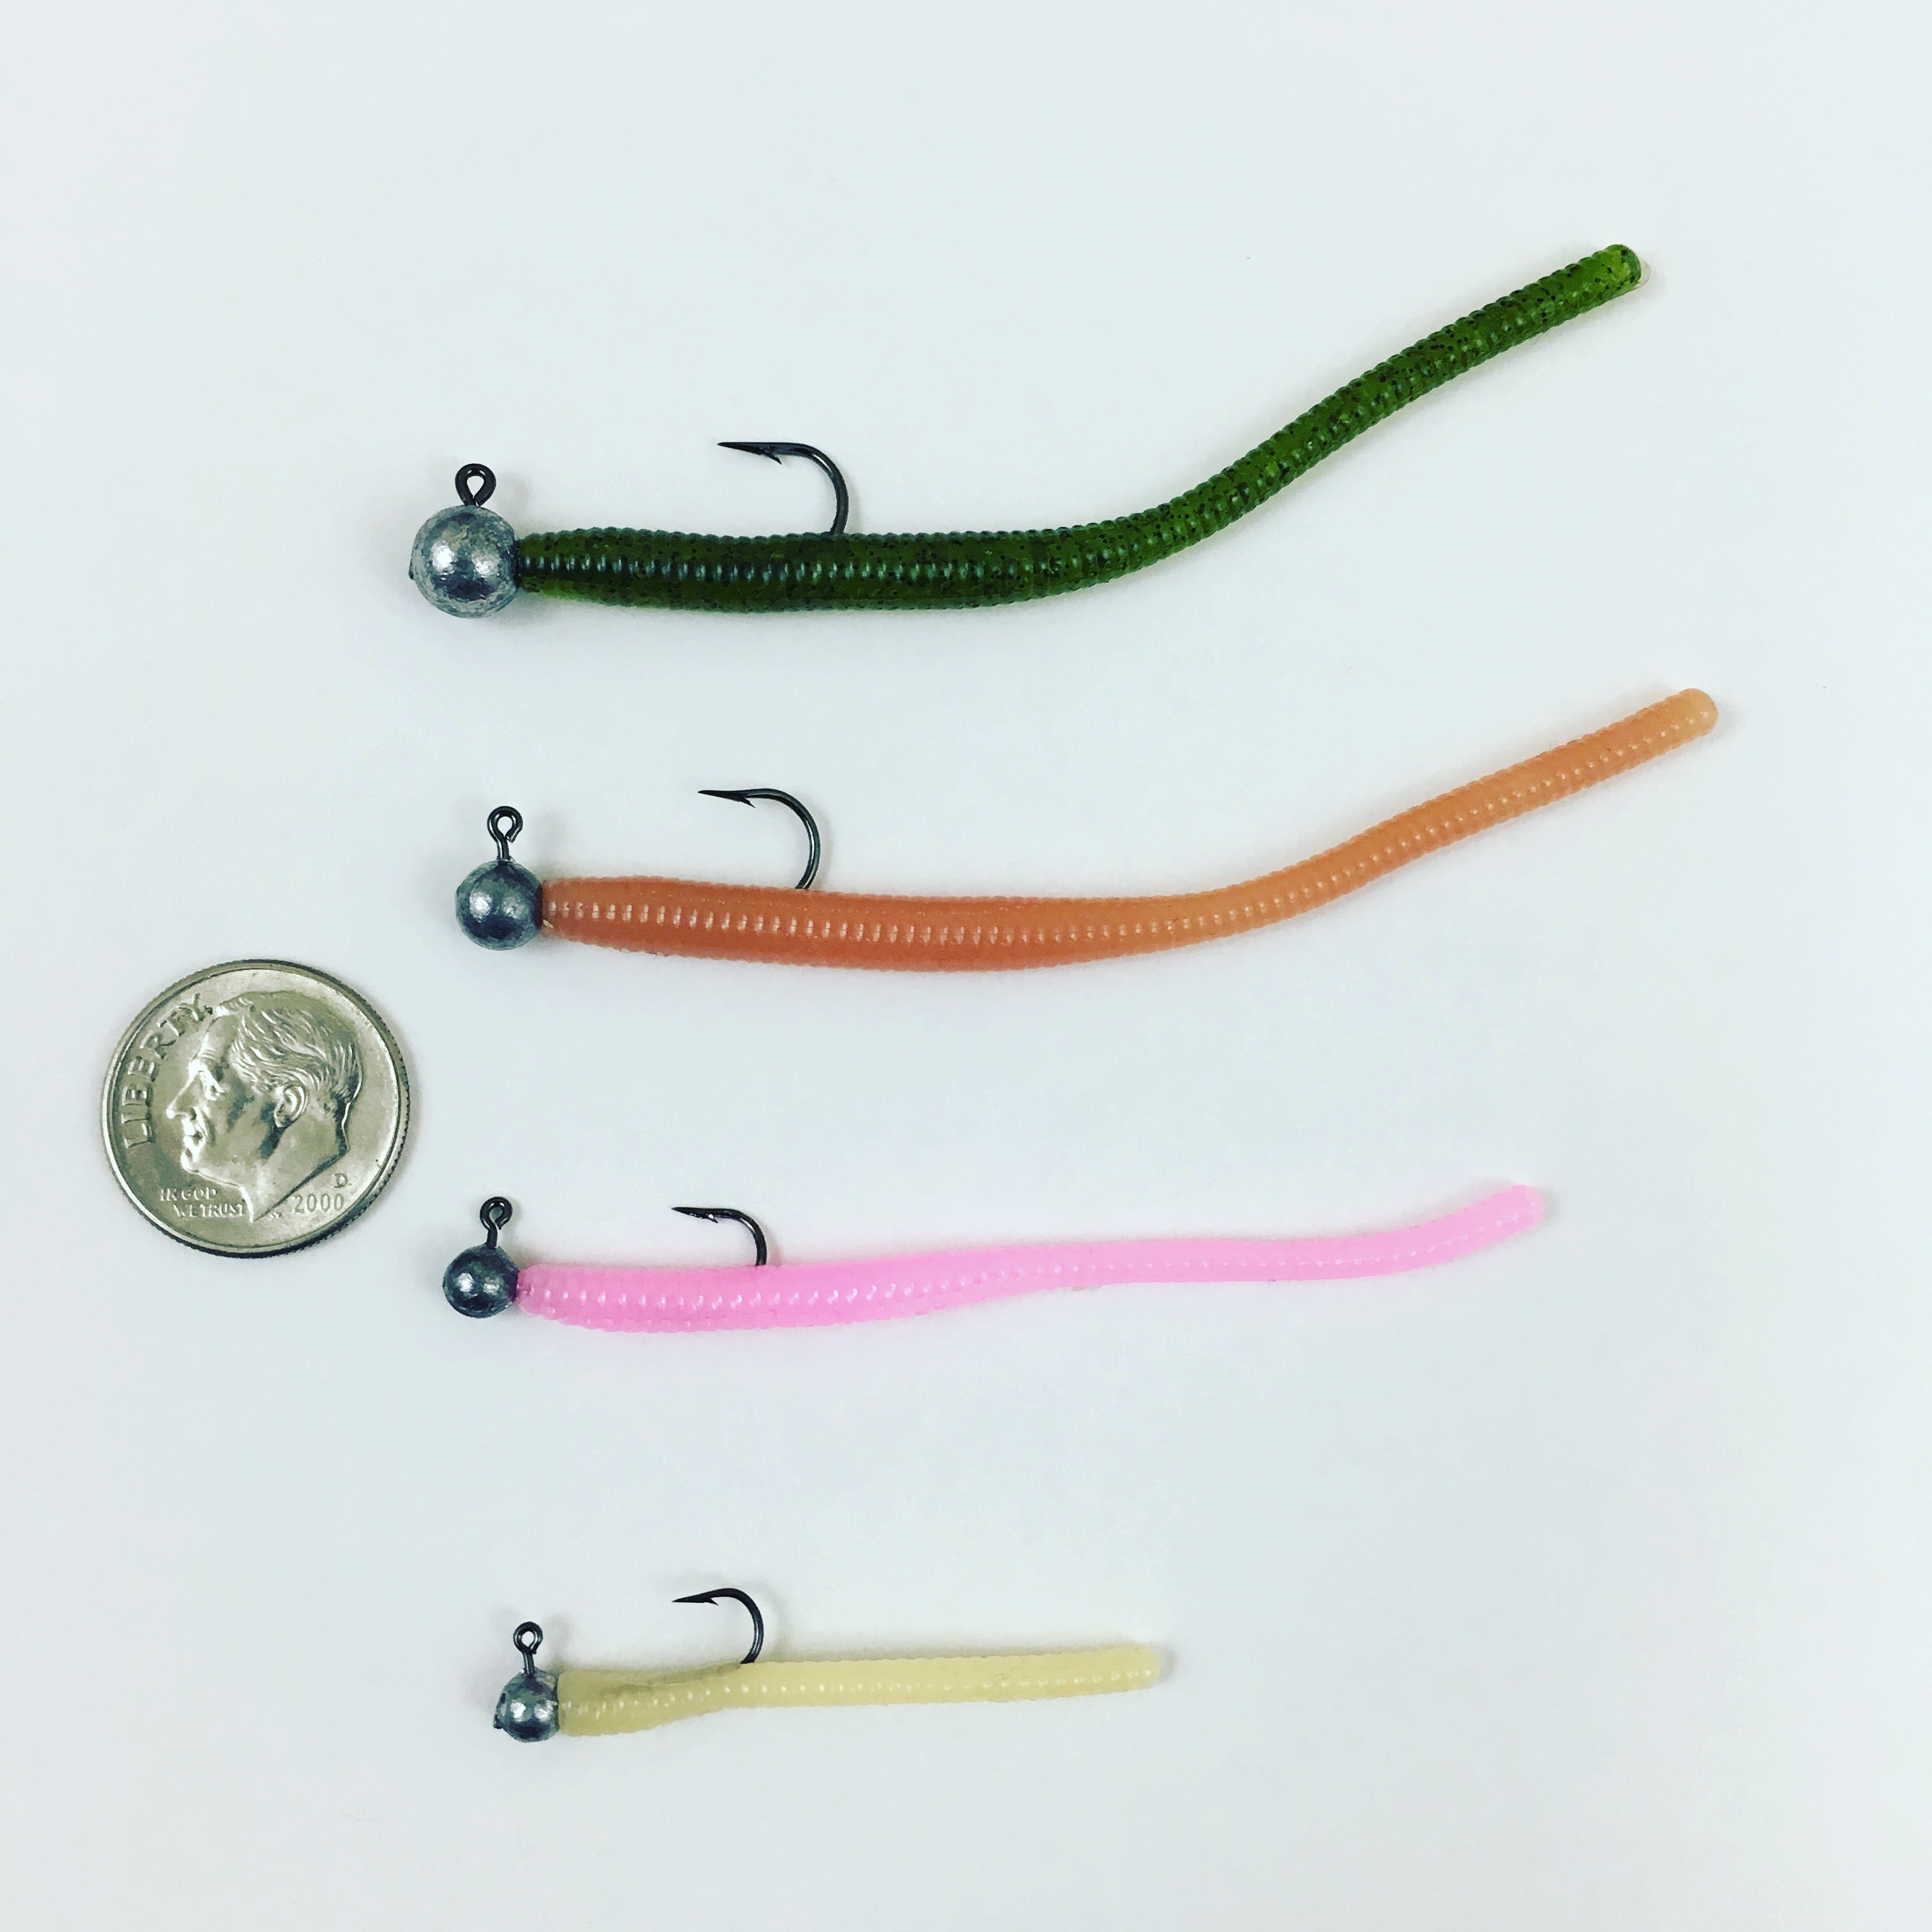 Trout Worms: Earthworm